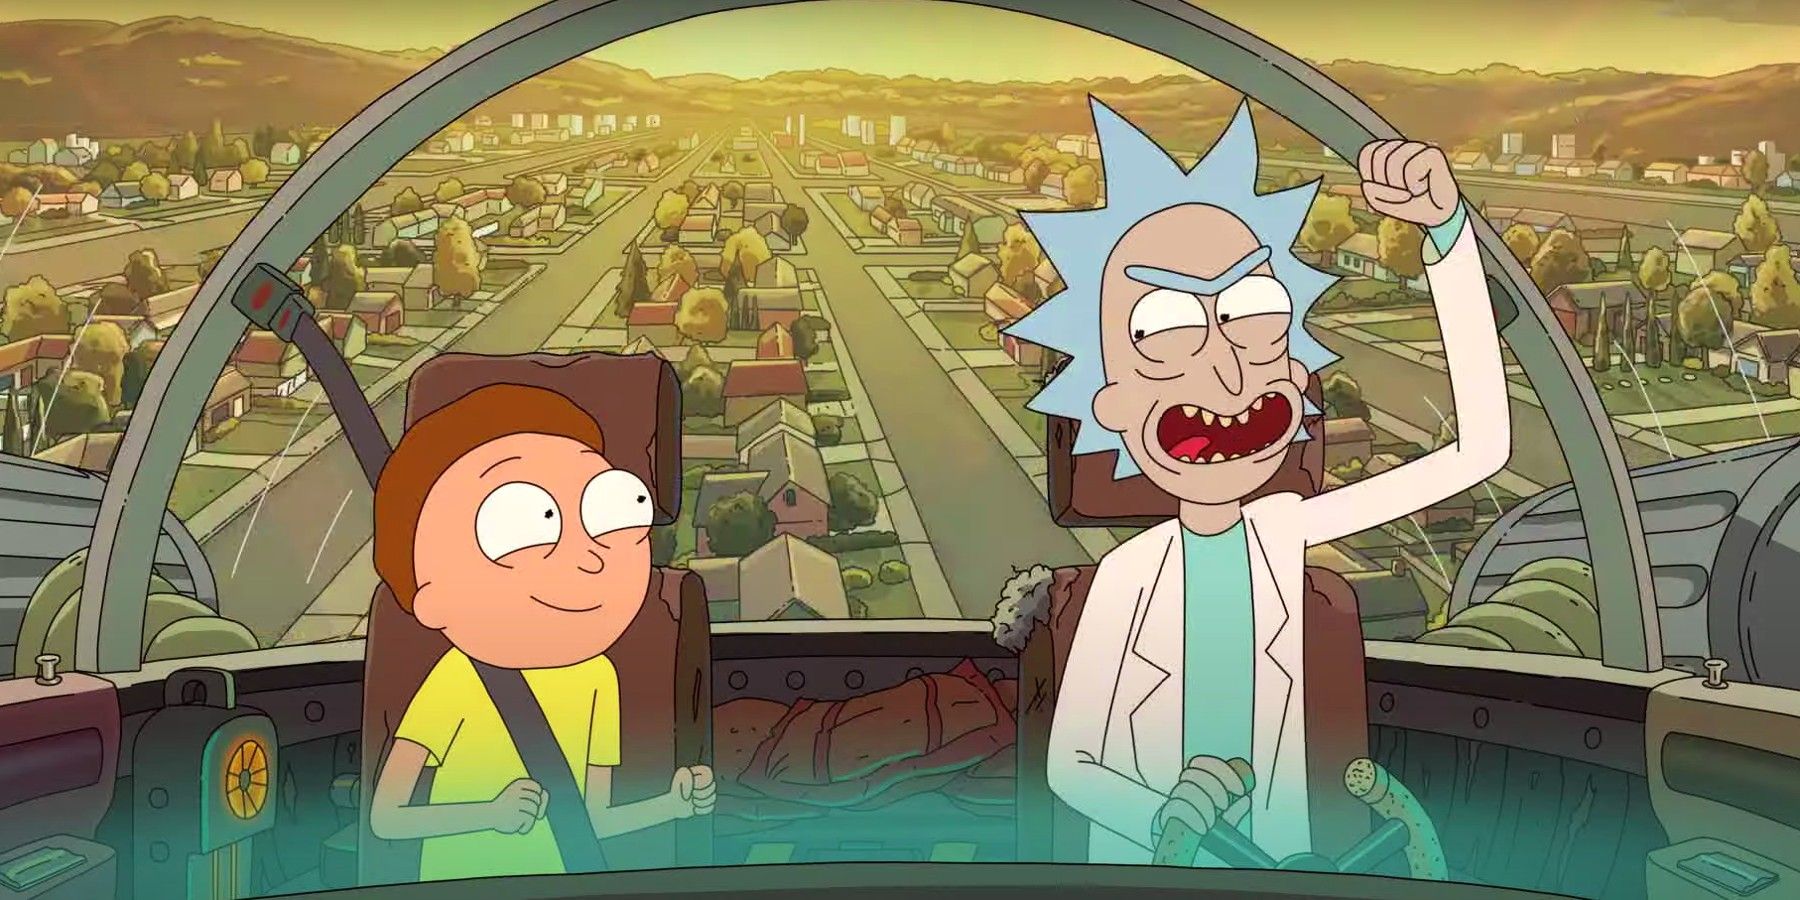 Rick and Morty's Justin Roiland recasting crisis could end up saving the  show